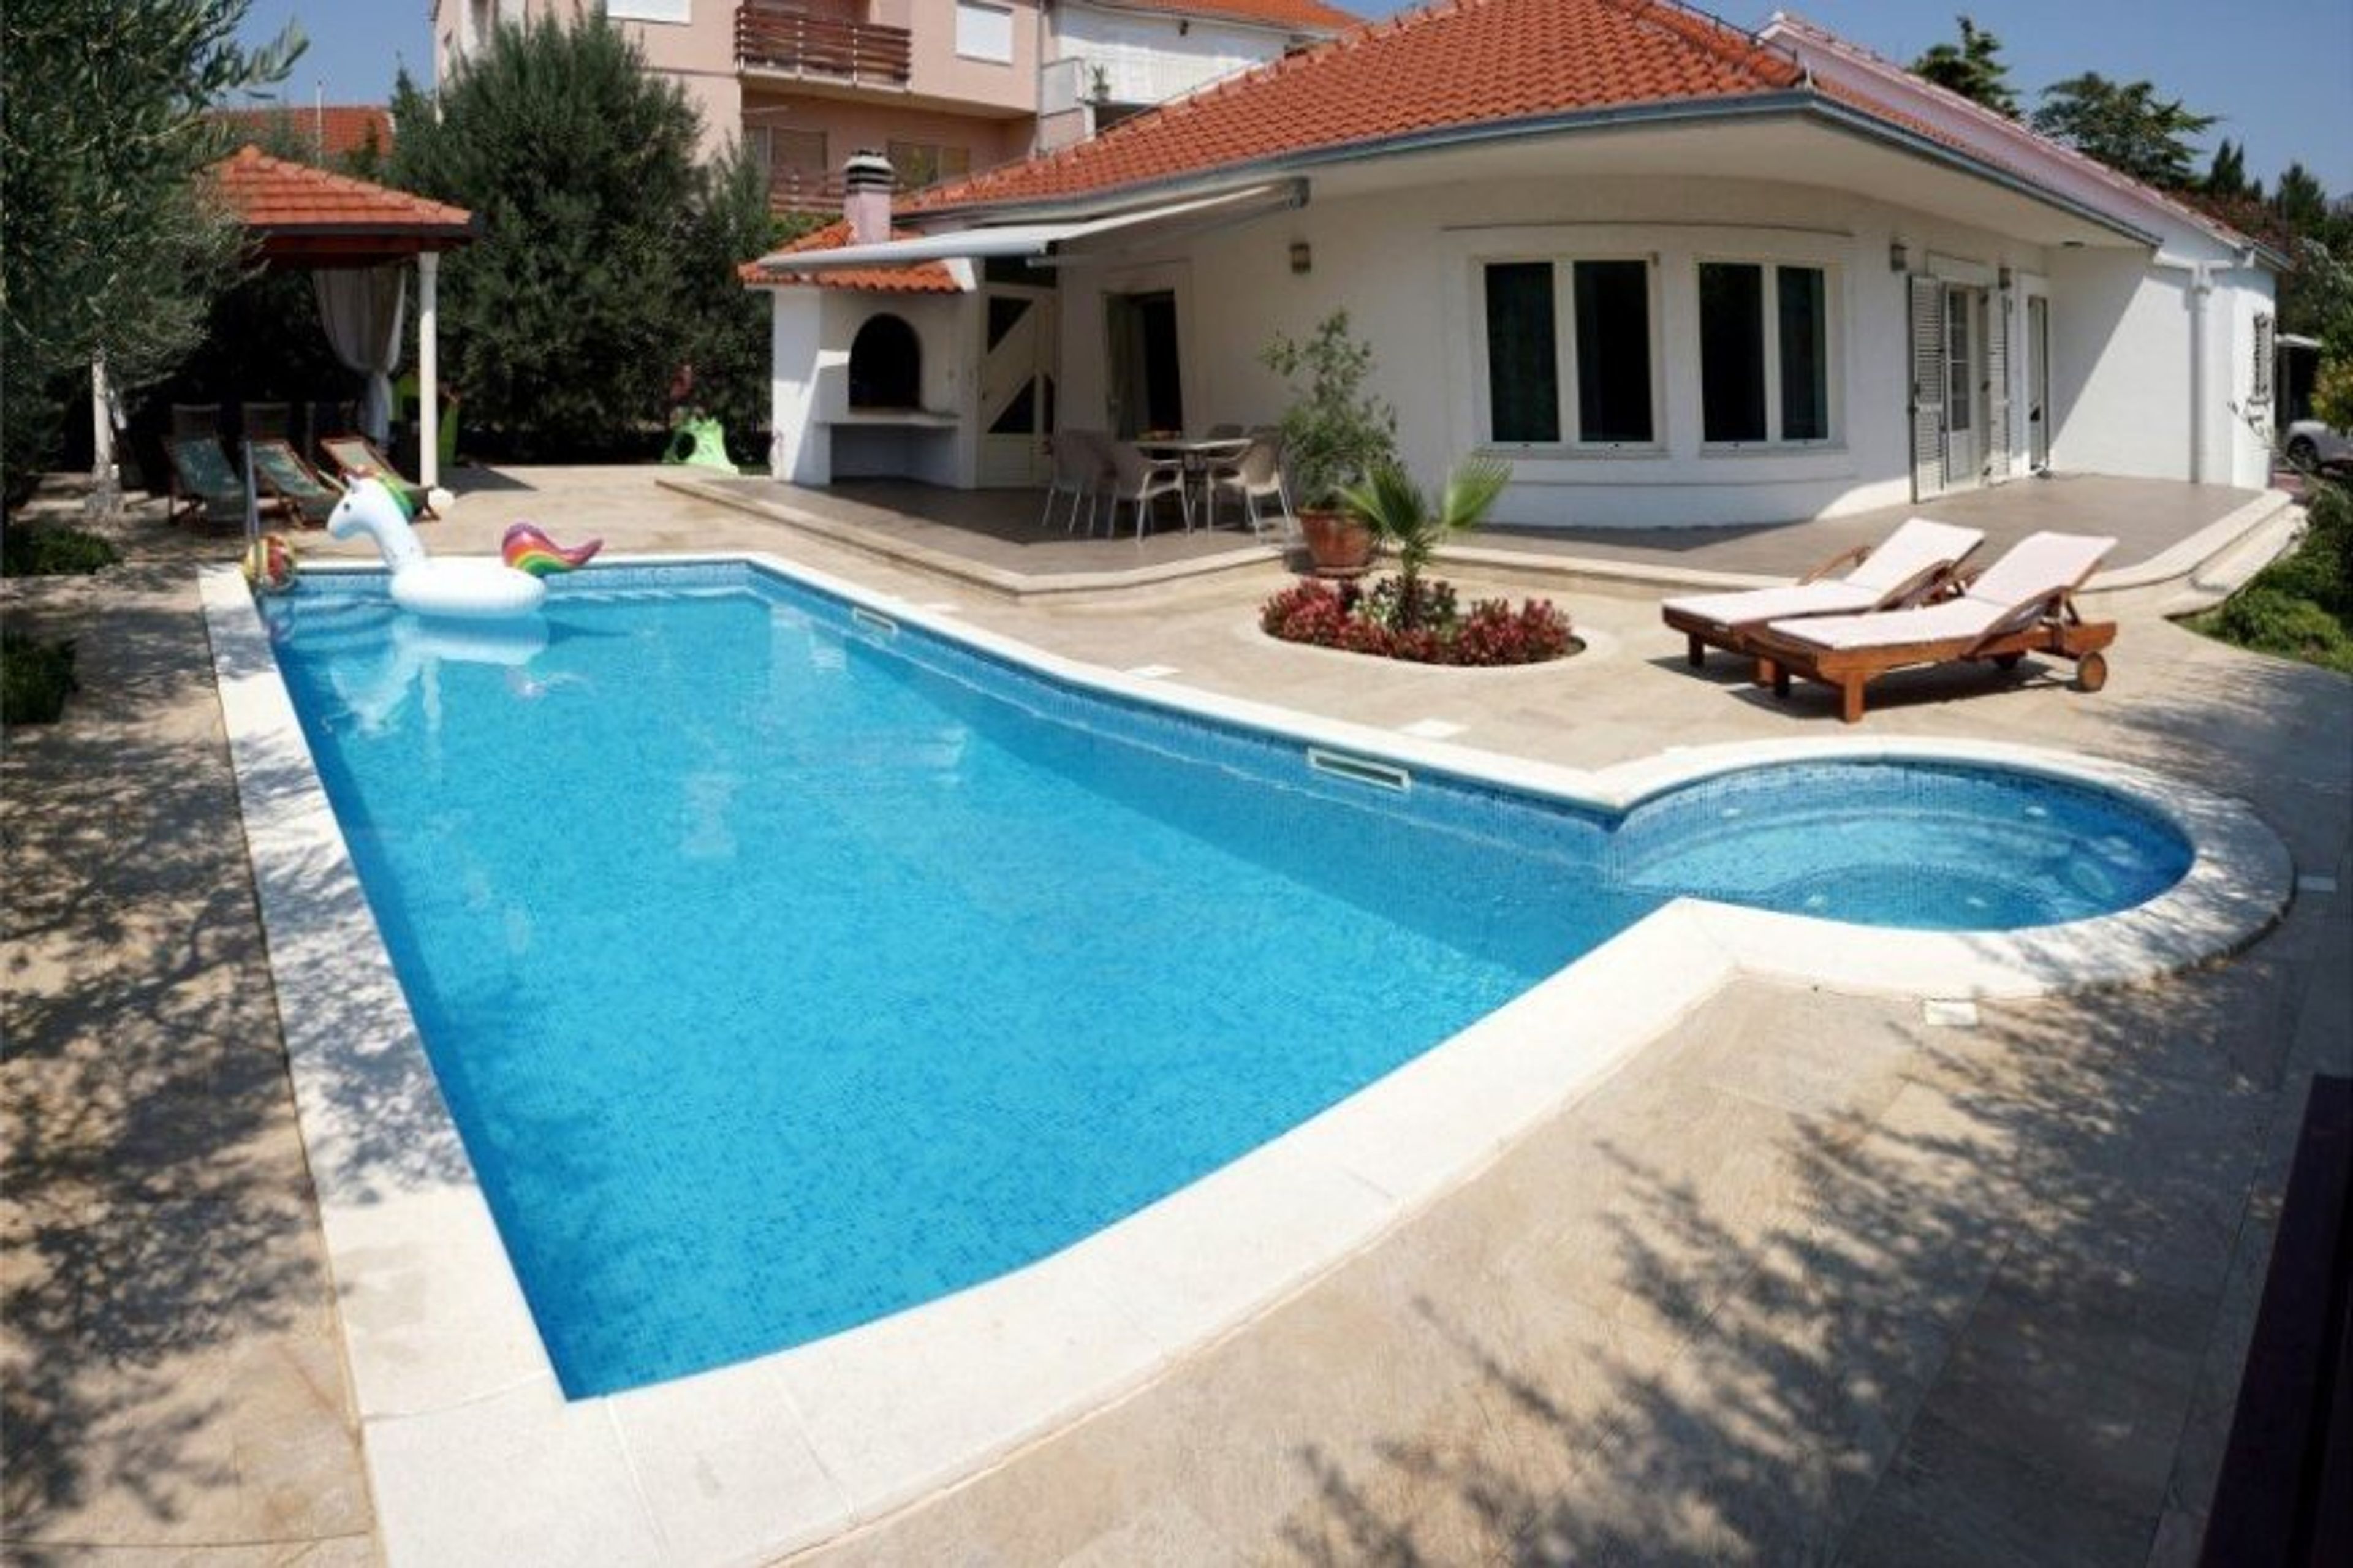 Sweet leisure- Villa Stela, a second home for relaxation, fun and rest